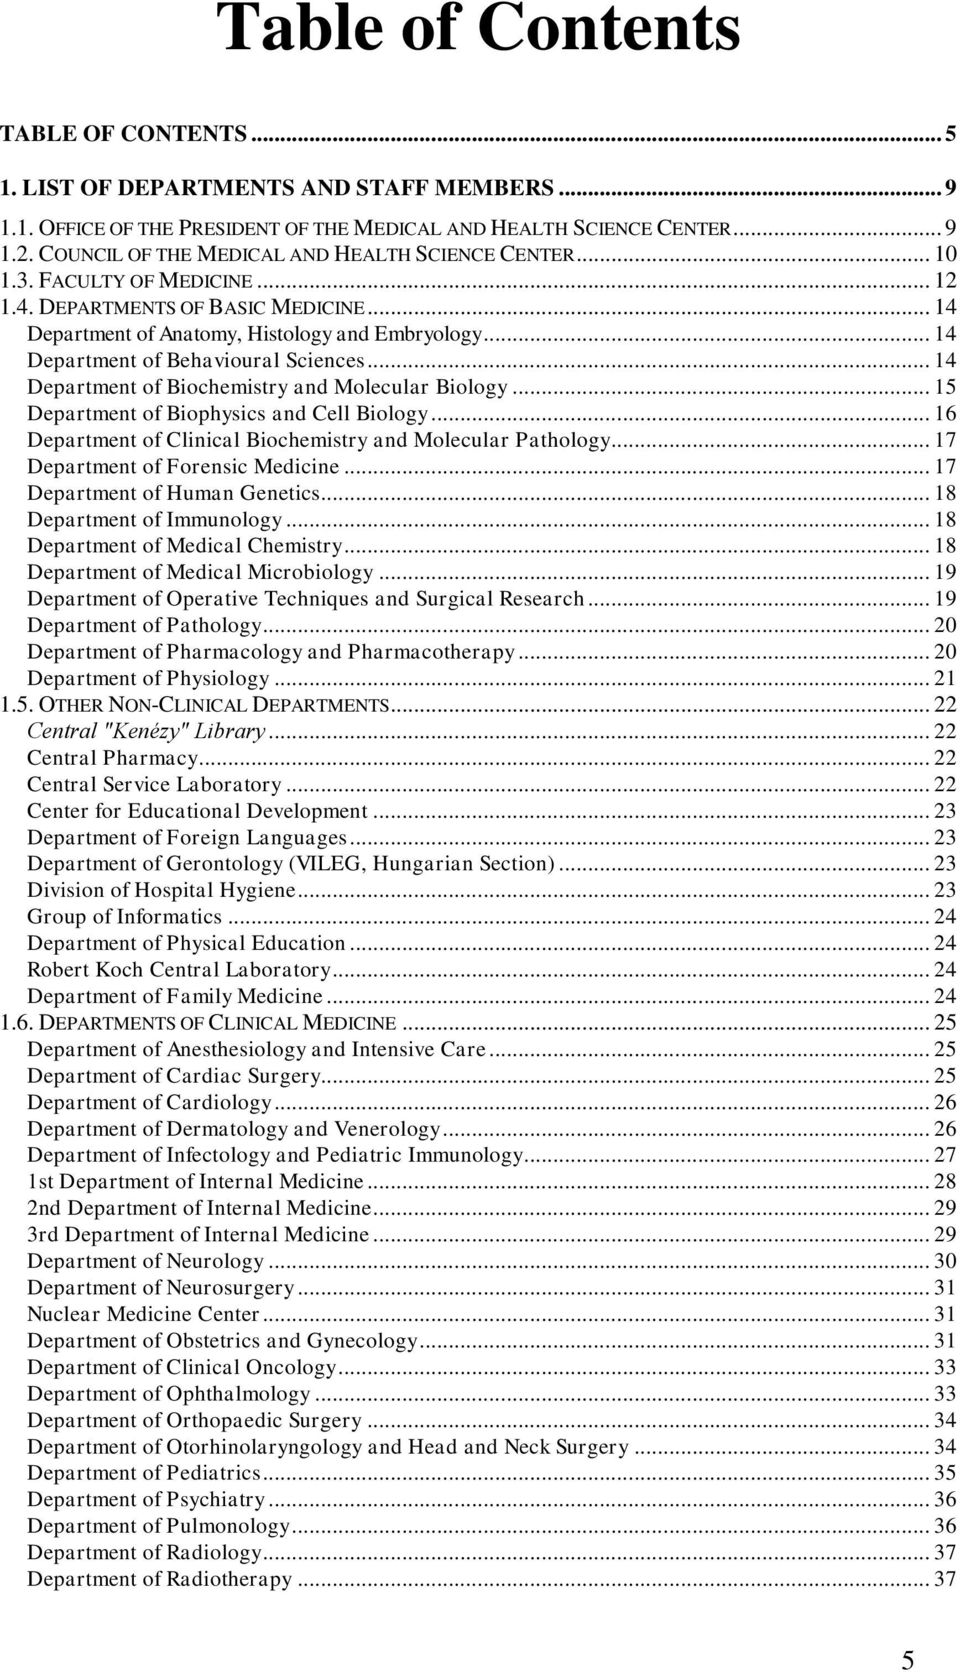 .. 14 Department of Behavioural Sciences... 14 Department of Biochemistry and Molecular Biology... 15 Department of Biophysics and Cell Biology.